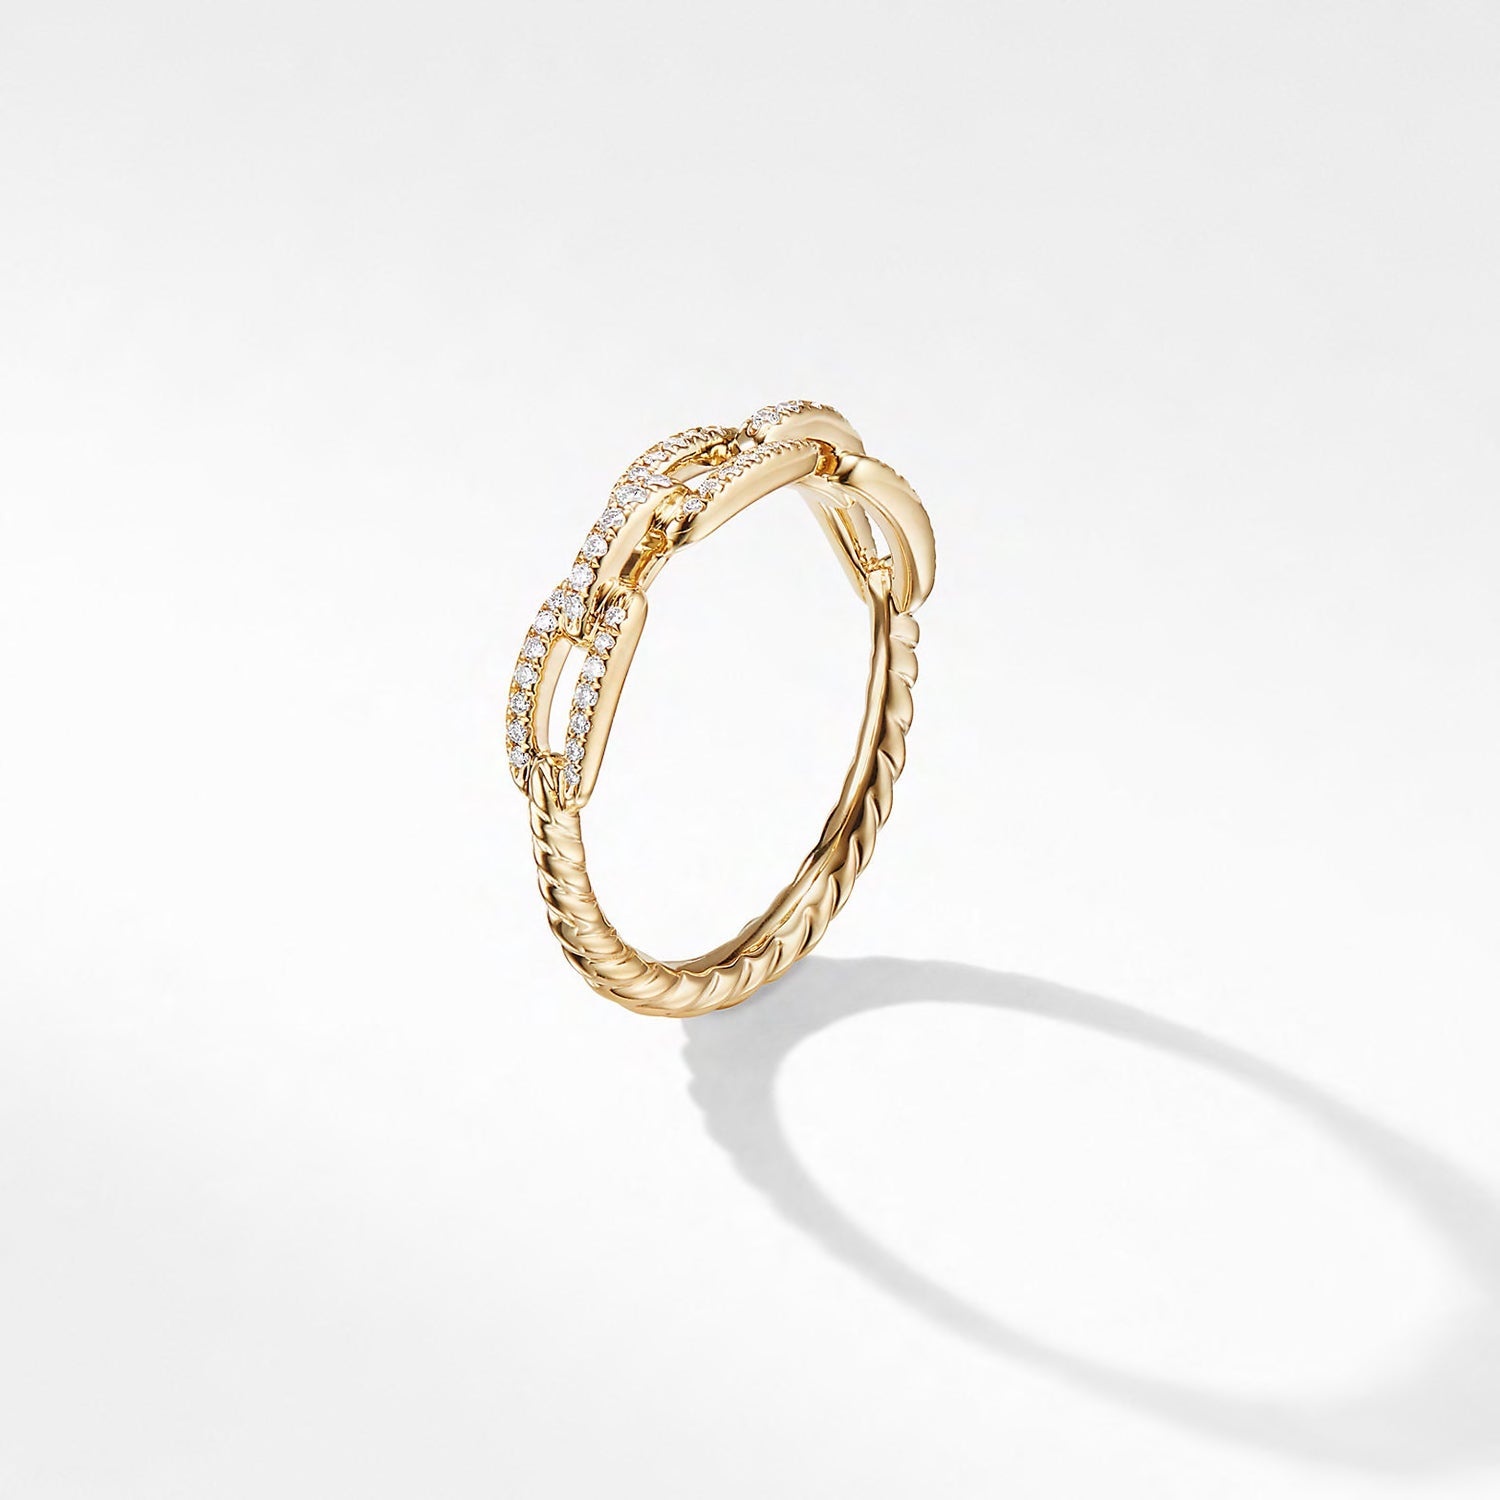 Stax Single Row Pavé Chain Link Ring with Diamonds in 18K Gold, 4.5mm -6